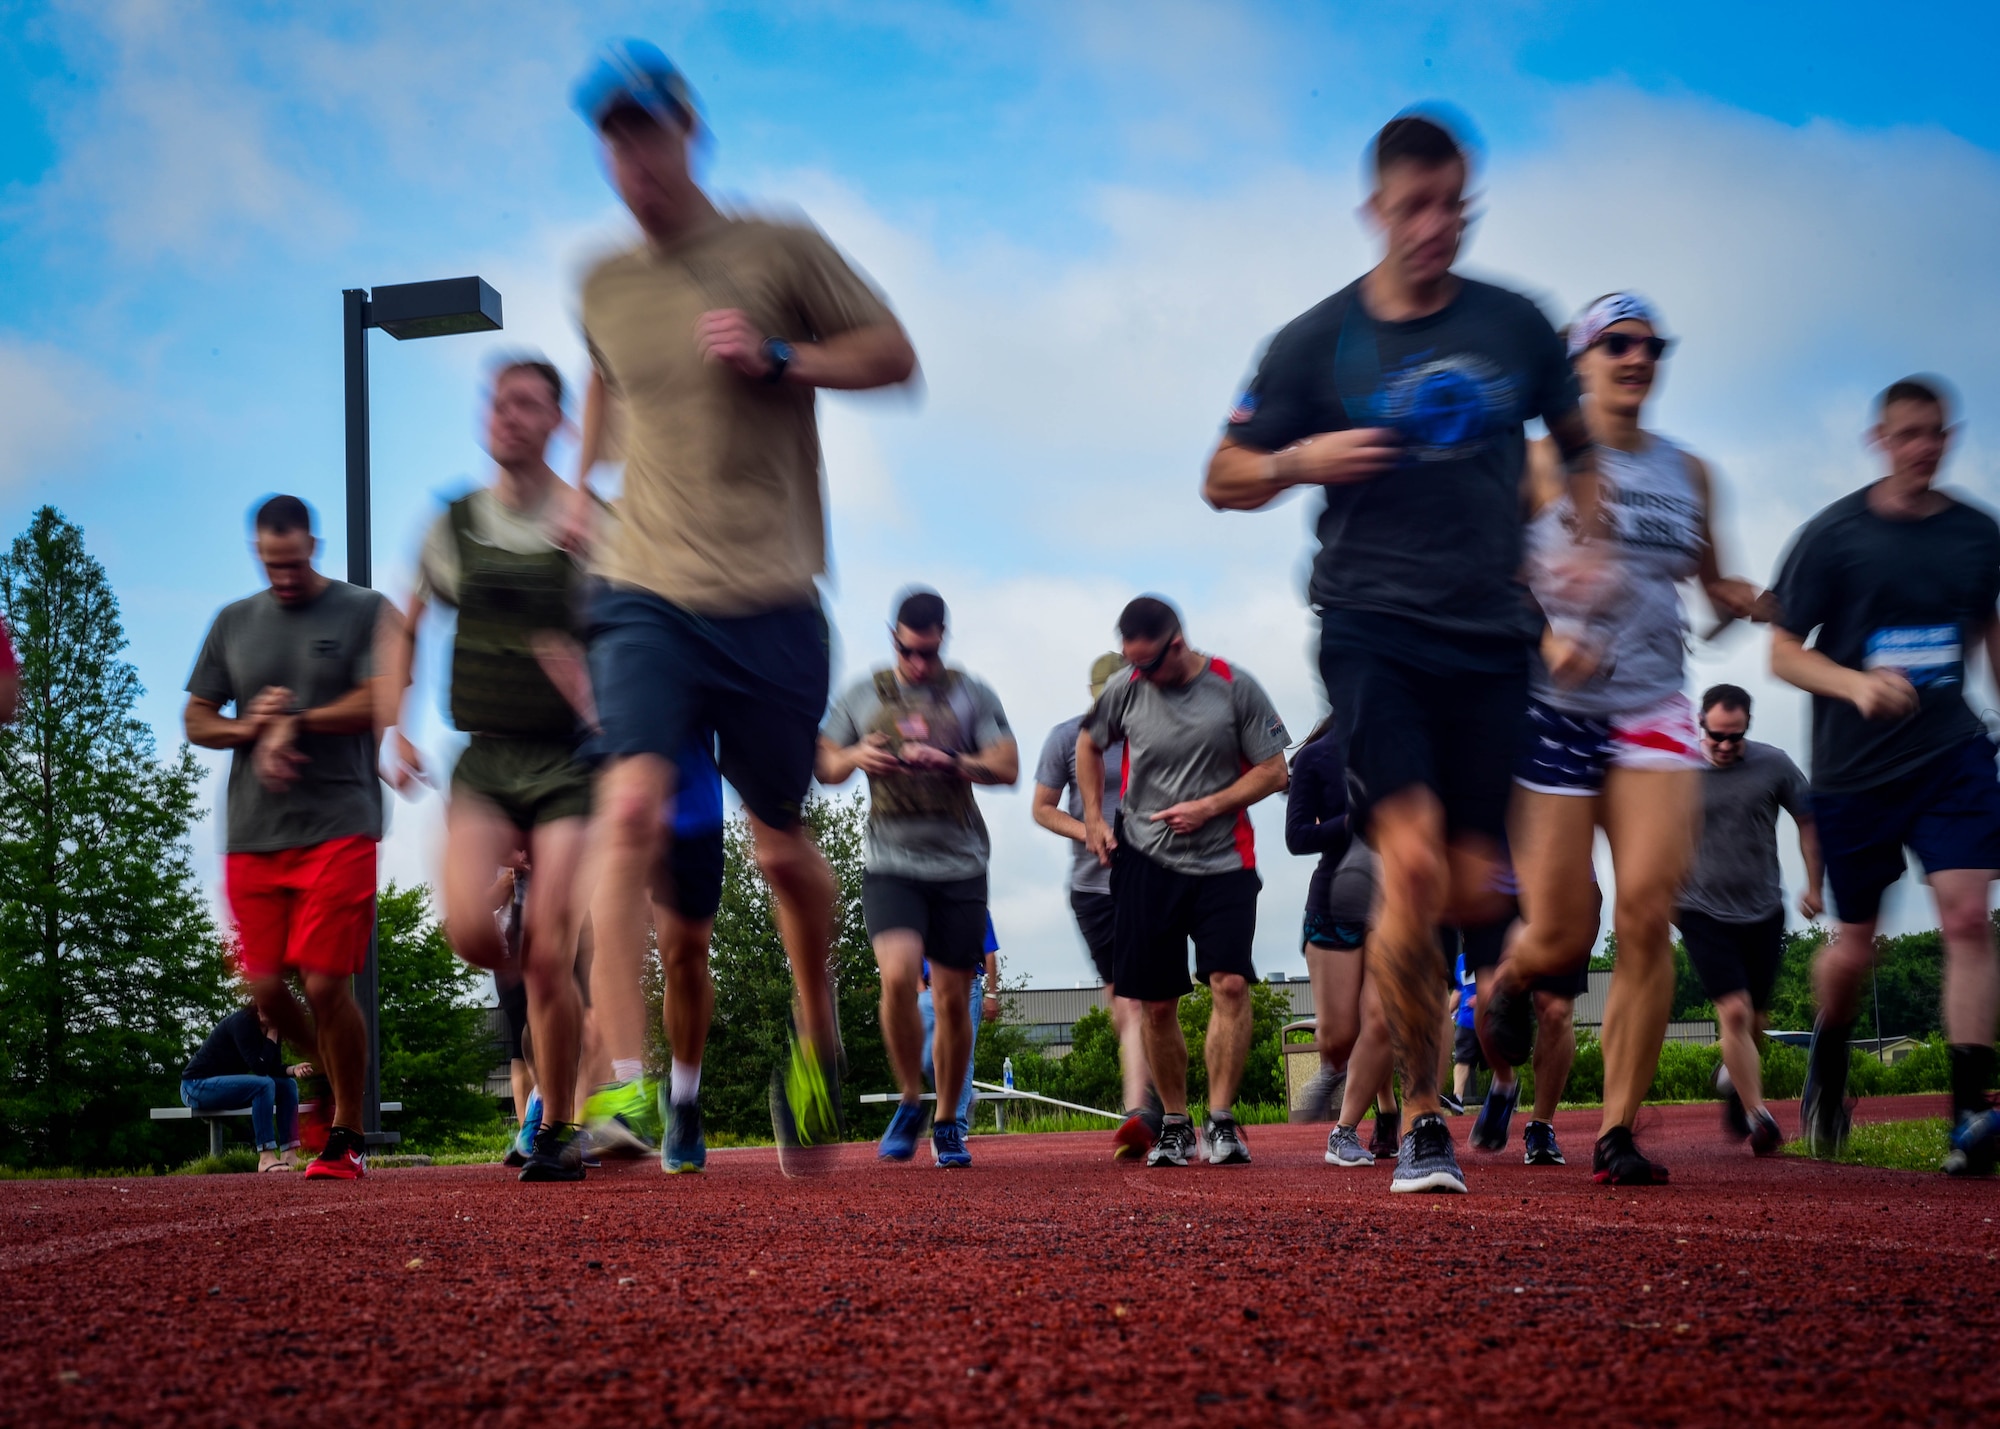 U.S. service members and their families begin a 1-mile run during a Memorial Day Murph and Pararescue Workout event at Joint Base Langley-Eustis, Va., May 29, 2017. The event included a variety of exercises and aimed to remember those who made the ultimate sacrifice for their country (U.S. Air Force photo/Staff Sgt. Areca T. Bell)